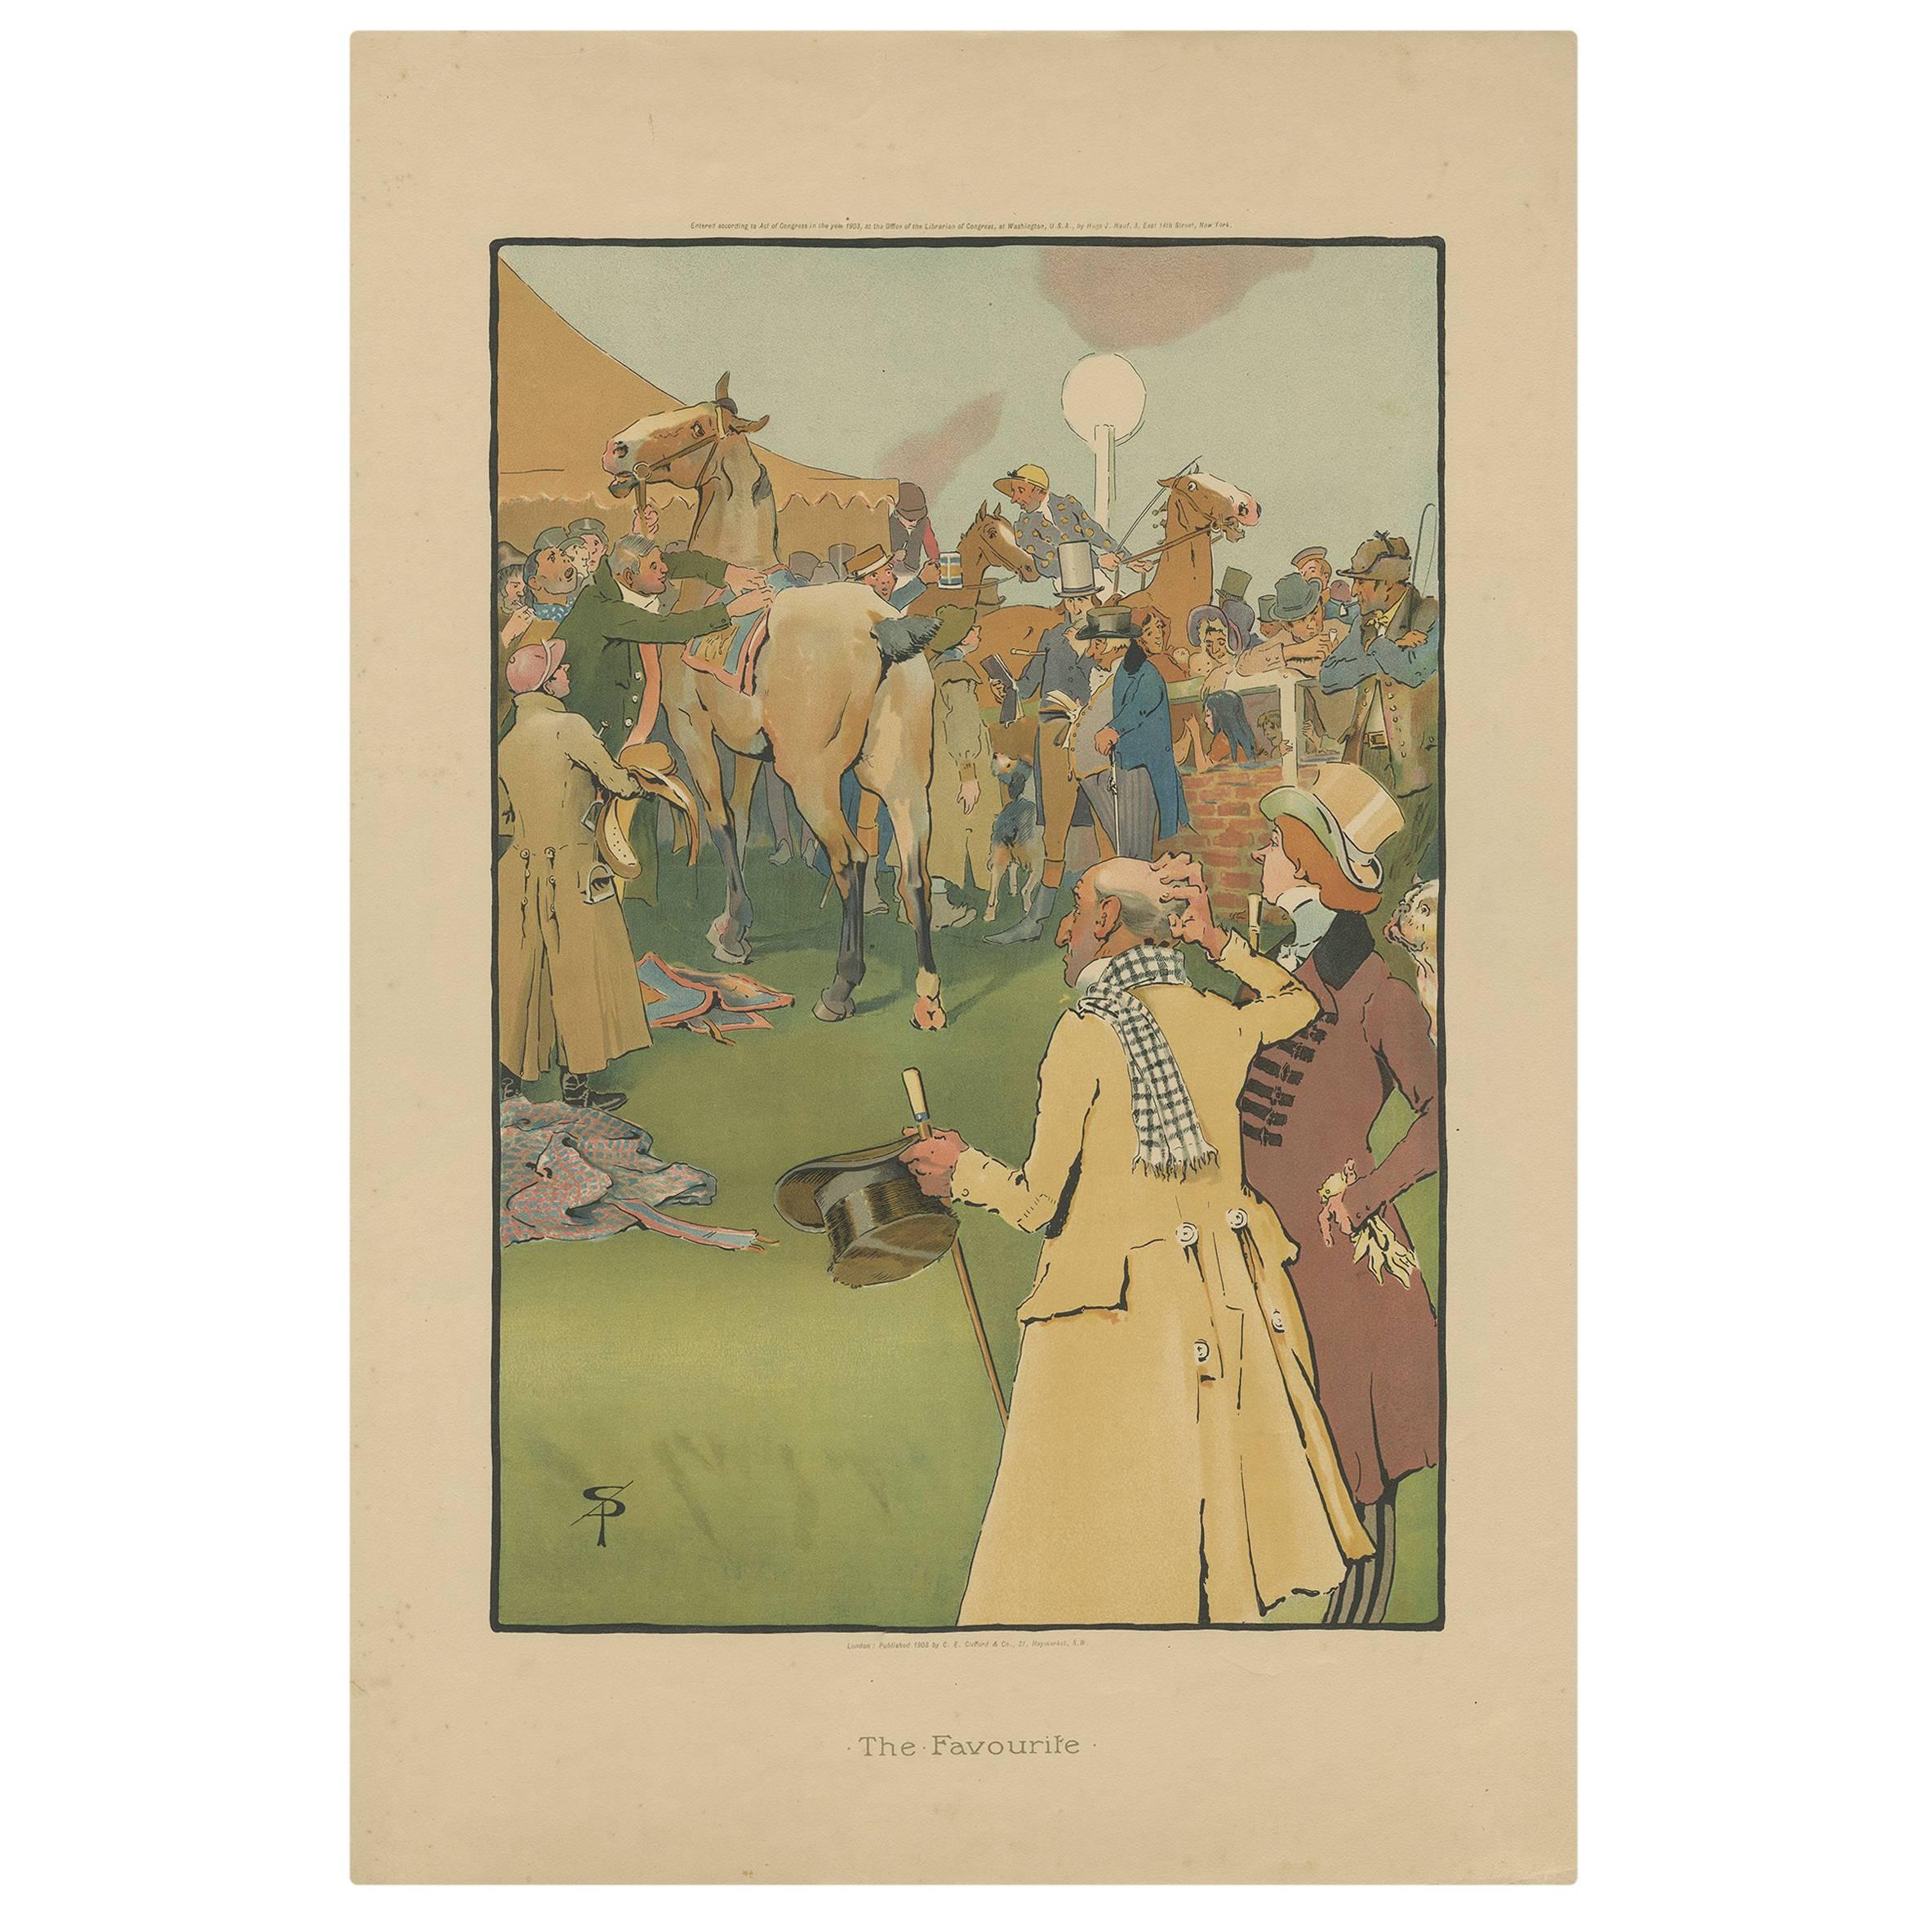 Antique Horse Print 'The Favourite' by Clifford & Co, 1903